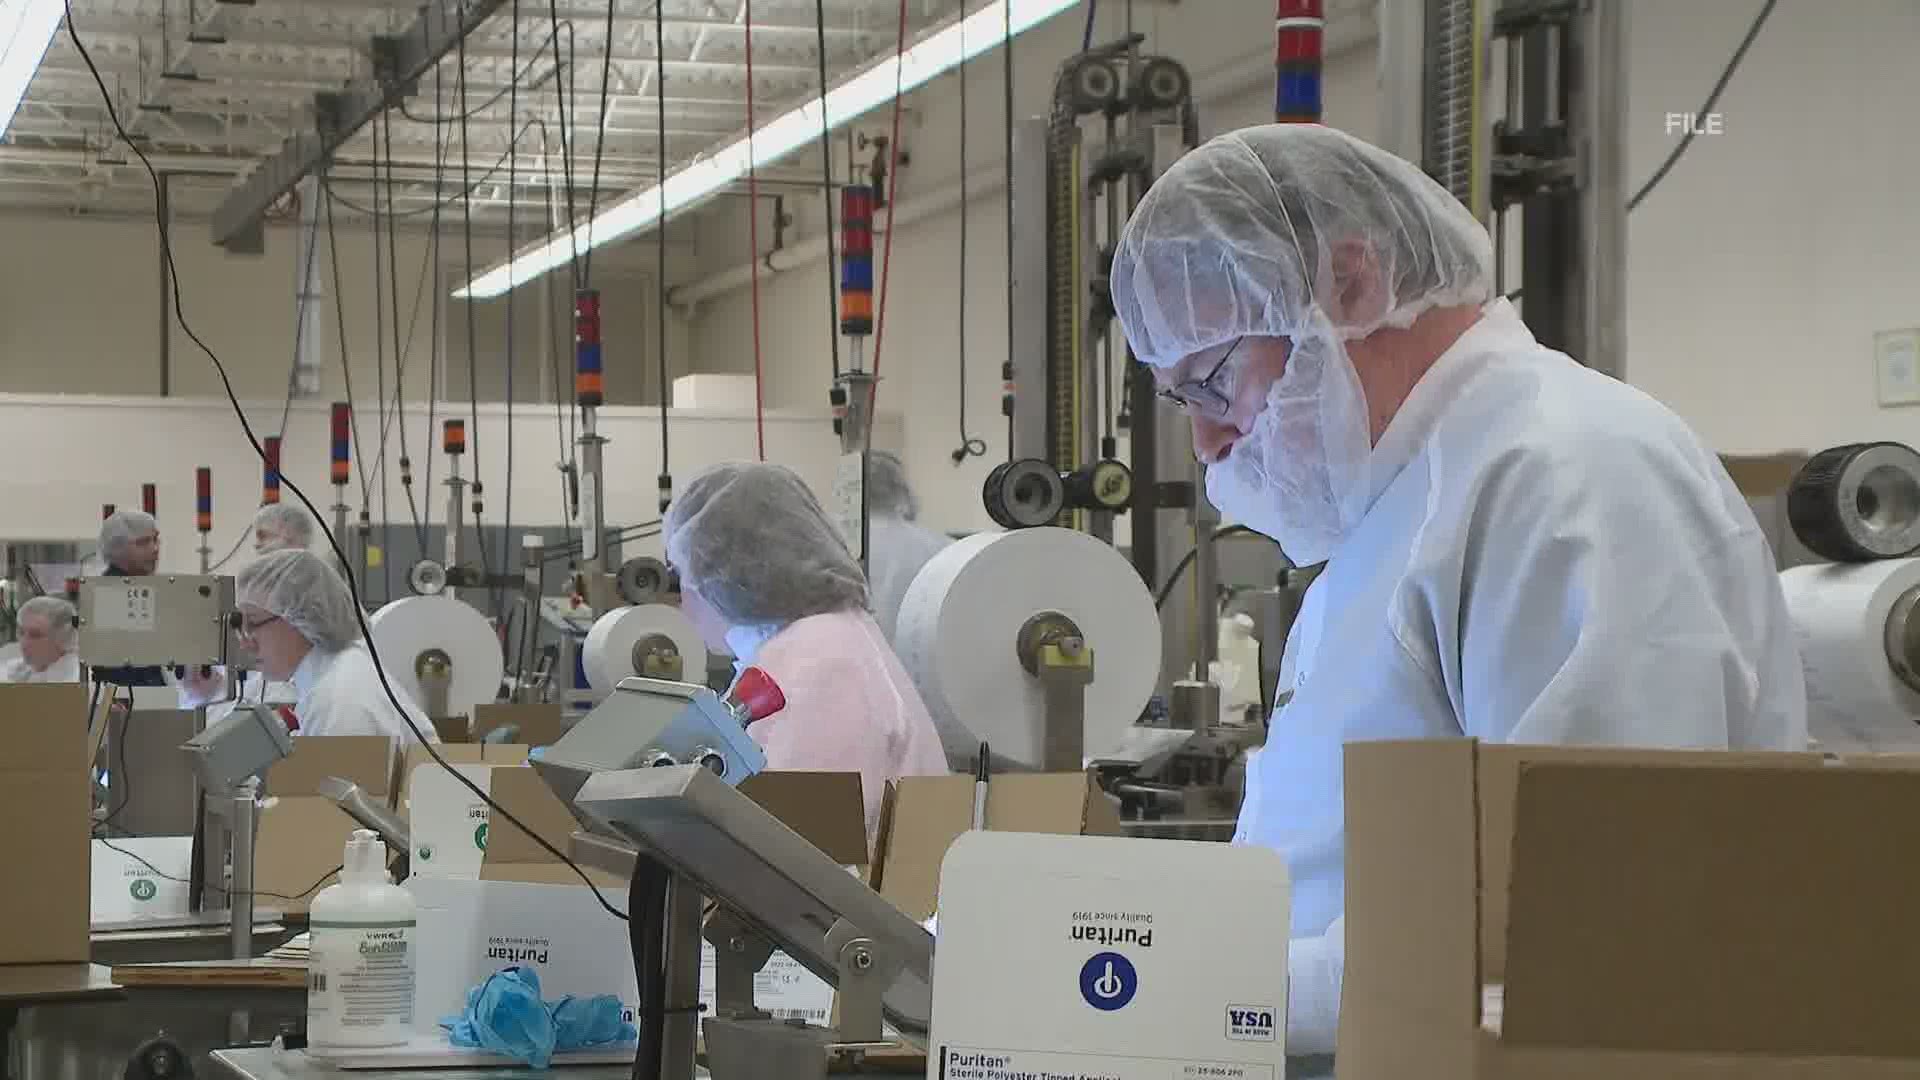 Puritan Medical Supplies is expected to open its new Pittsfield facility in early July. Puritan makes testing swabs, including some for COVID-19.